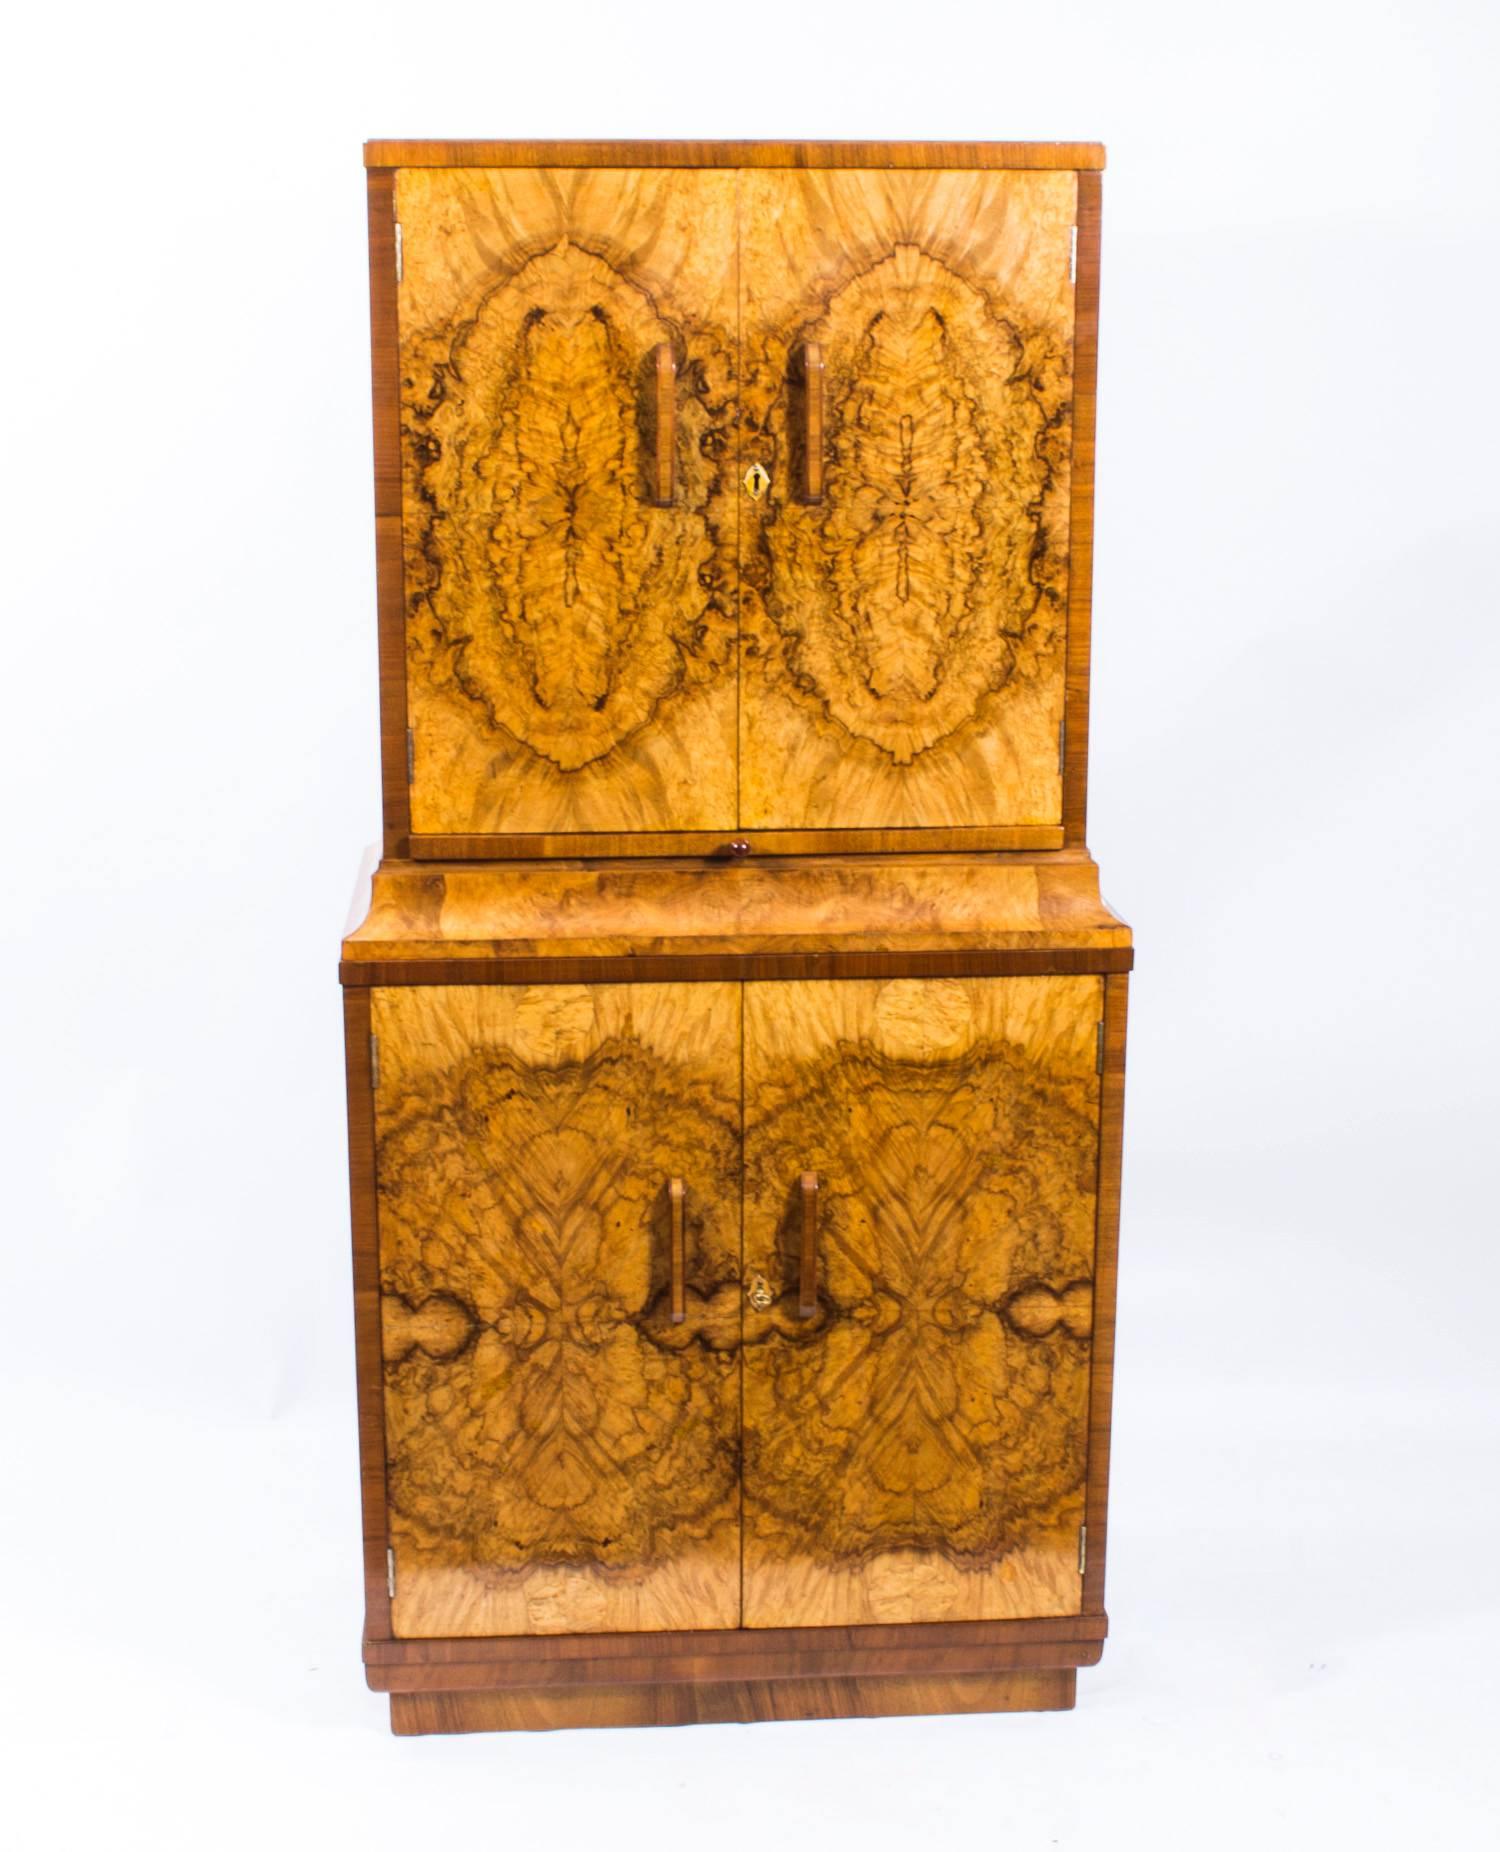 This is a fantastic antique Art Deco period burr walnut cocktail cabinet, circa 1930 in date. 

It bears the ivorine label of the renowned maker of Deco furniture, 
